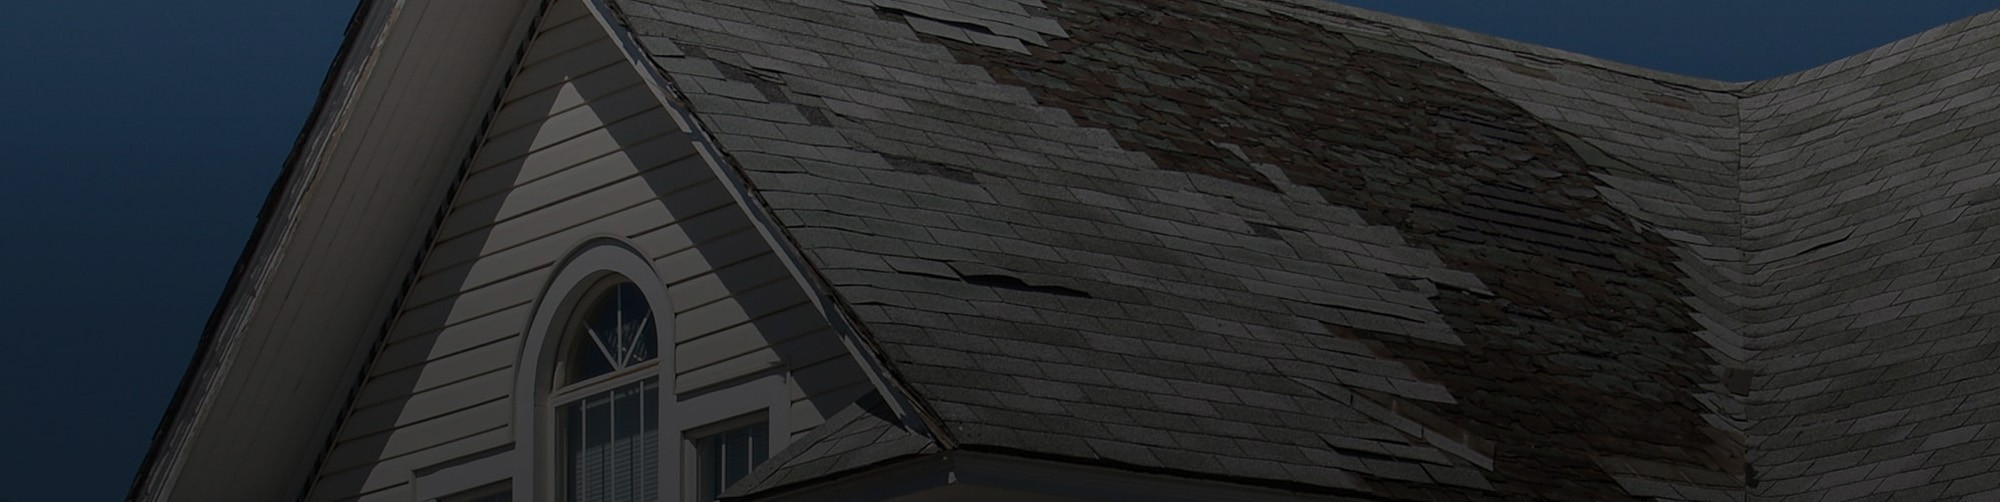 emergency roof repair services in green bay